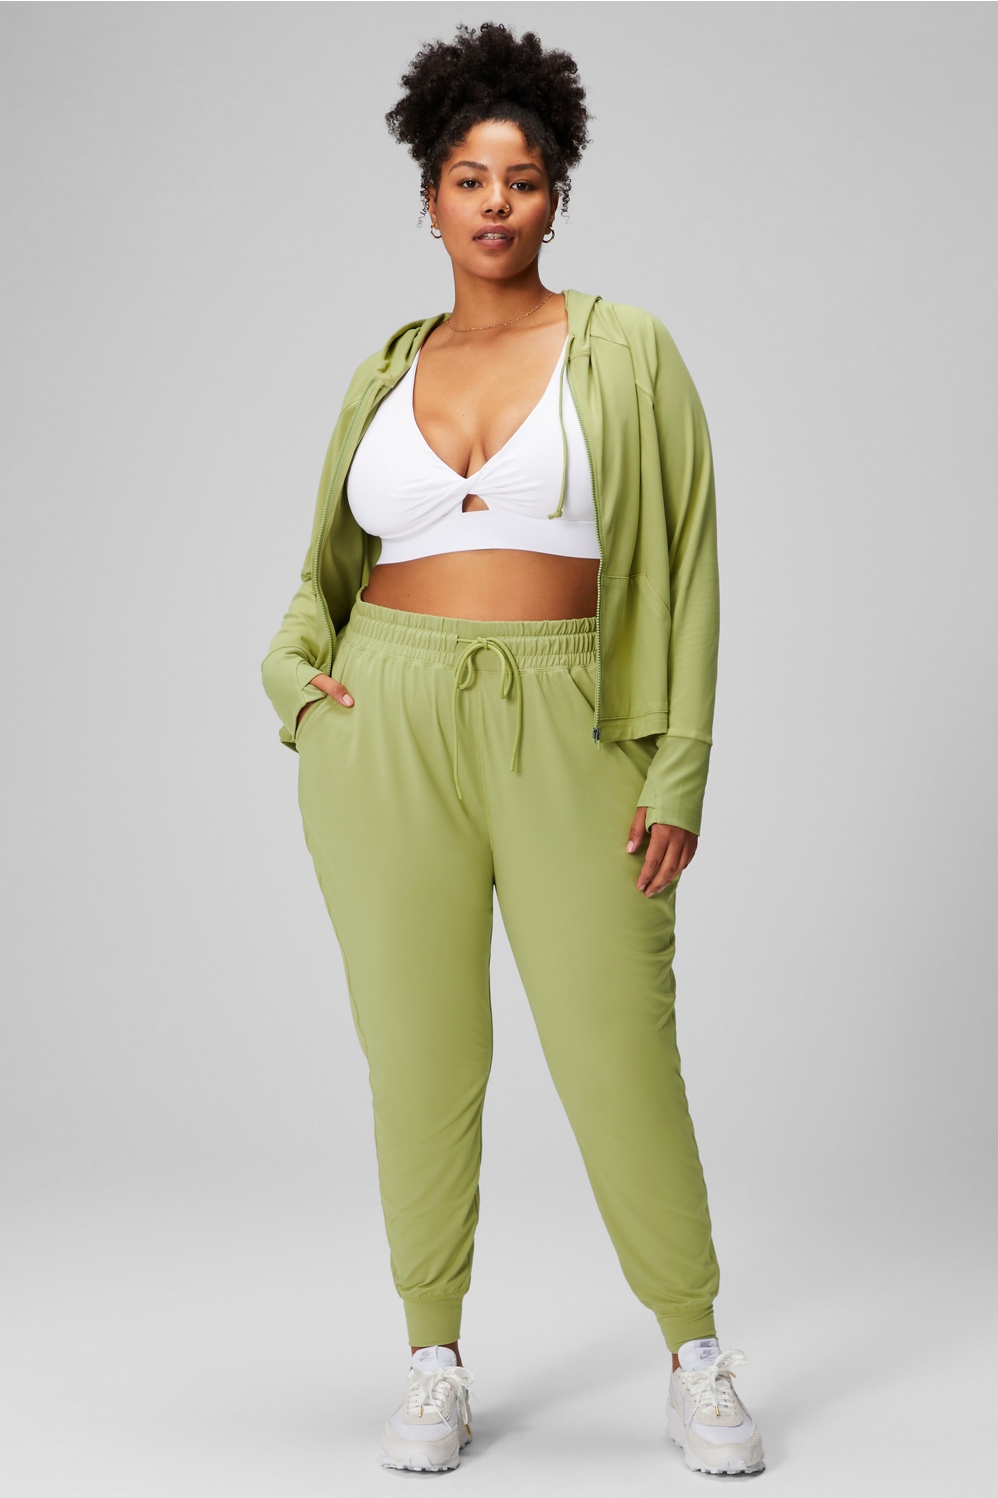 High-Waisted Performance Jogger - Fabletics